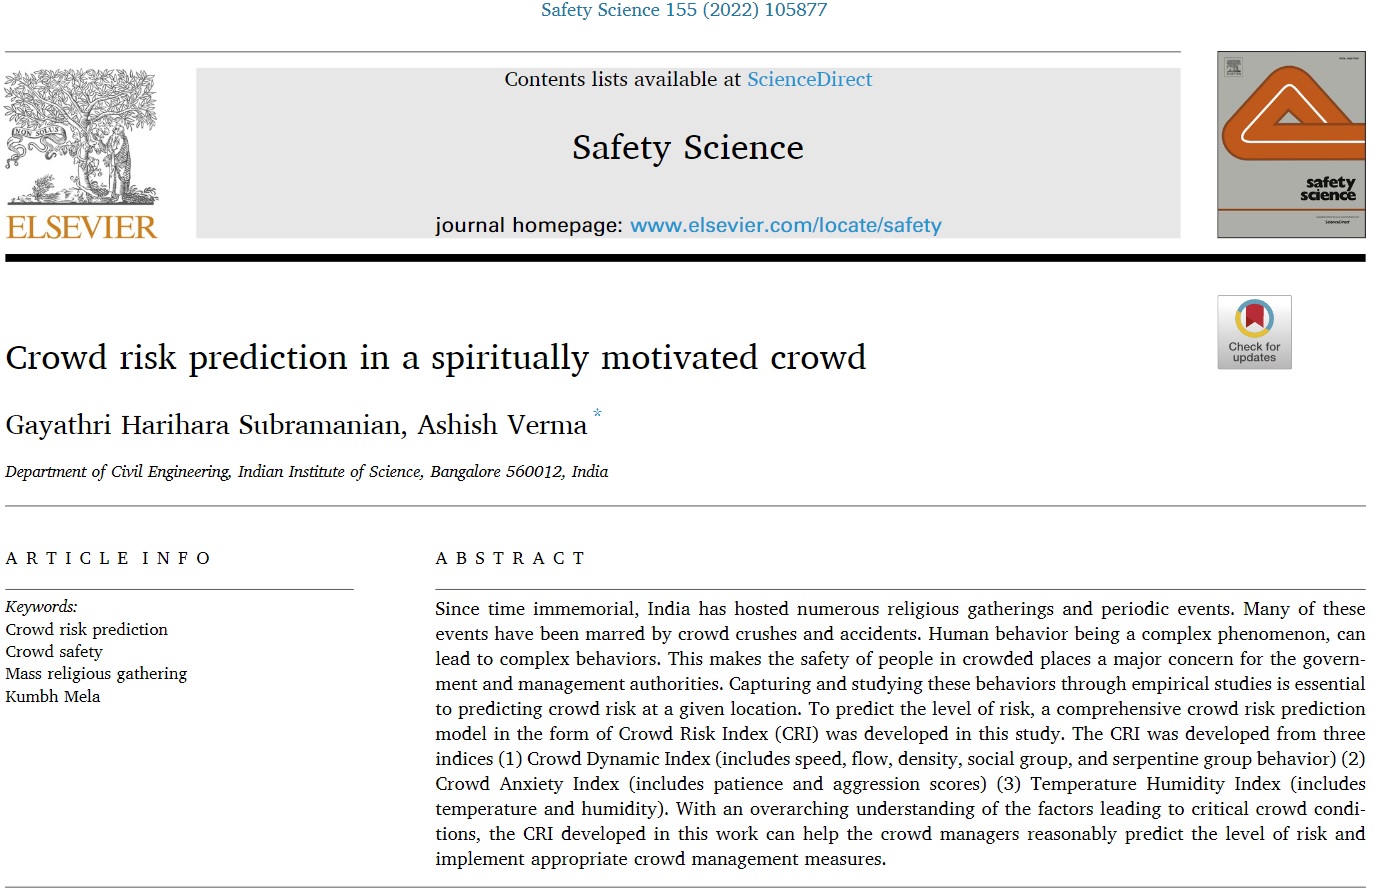 Crowd risk prediction in a spiritually motivated crowd